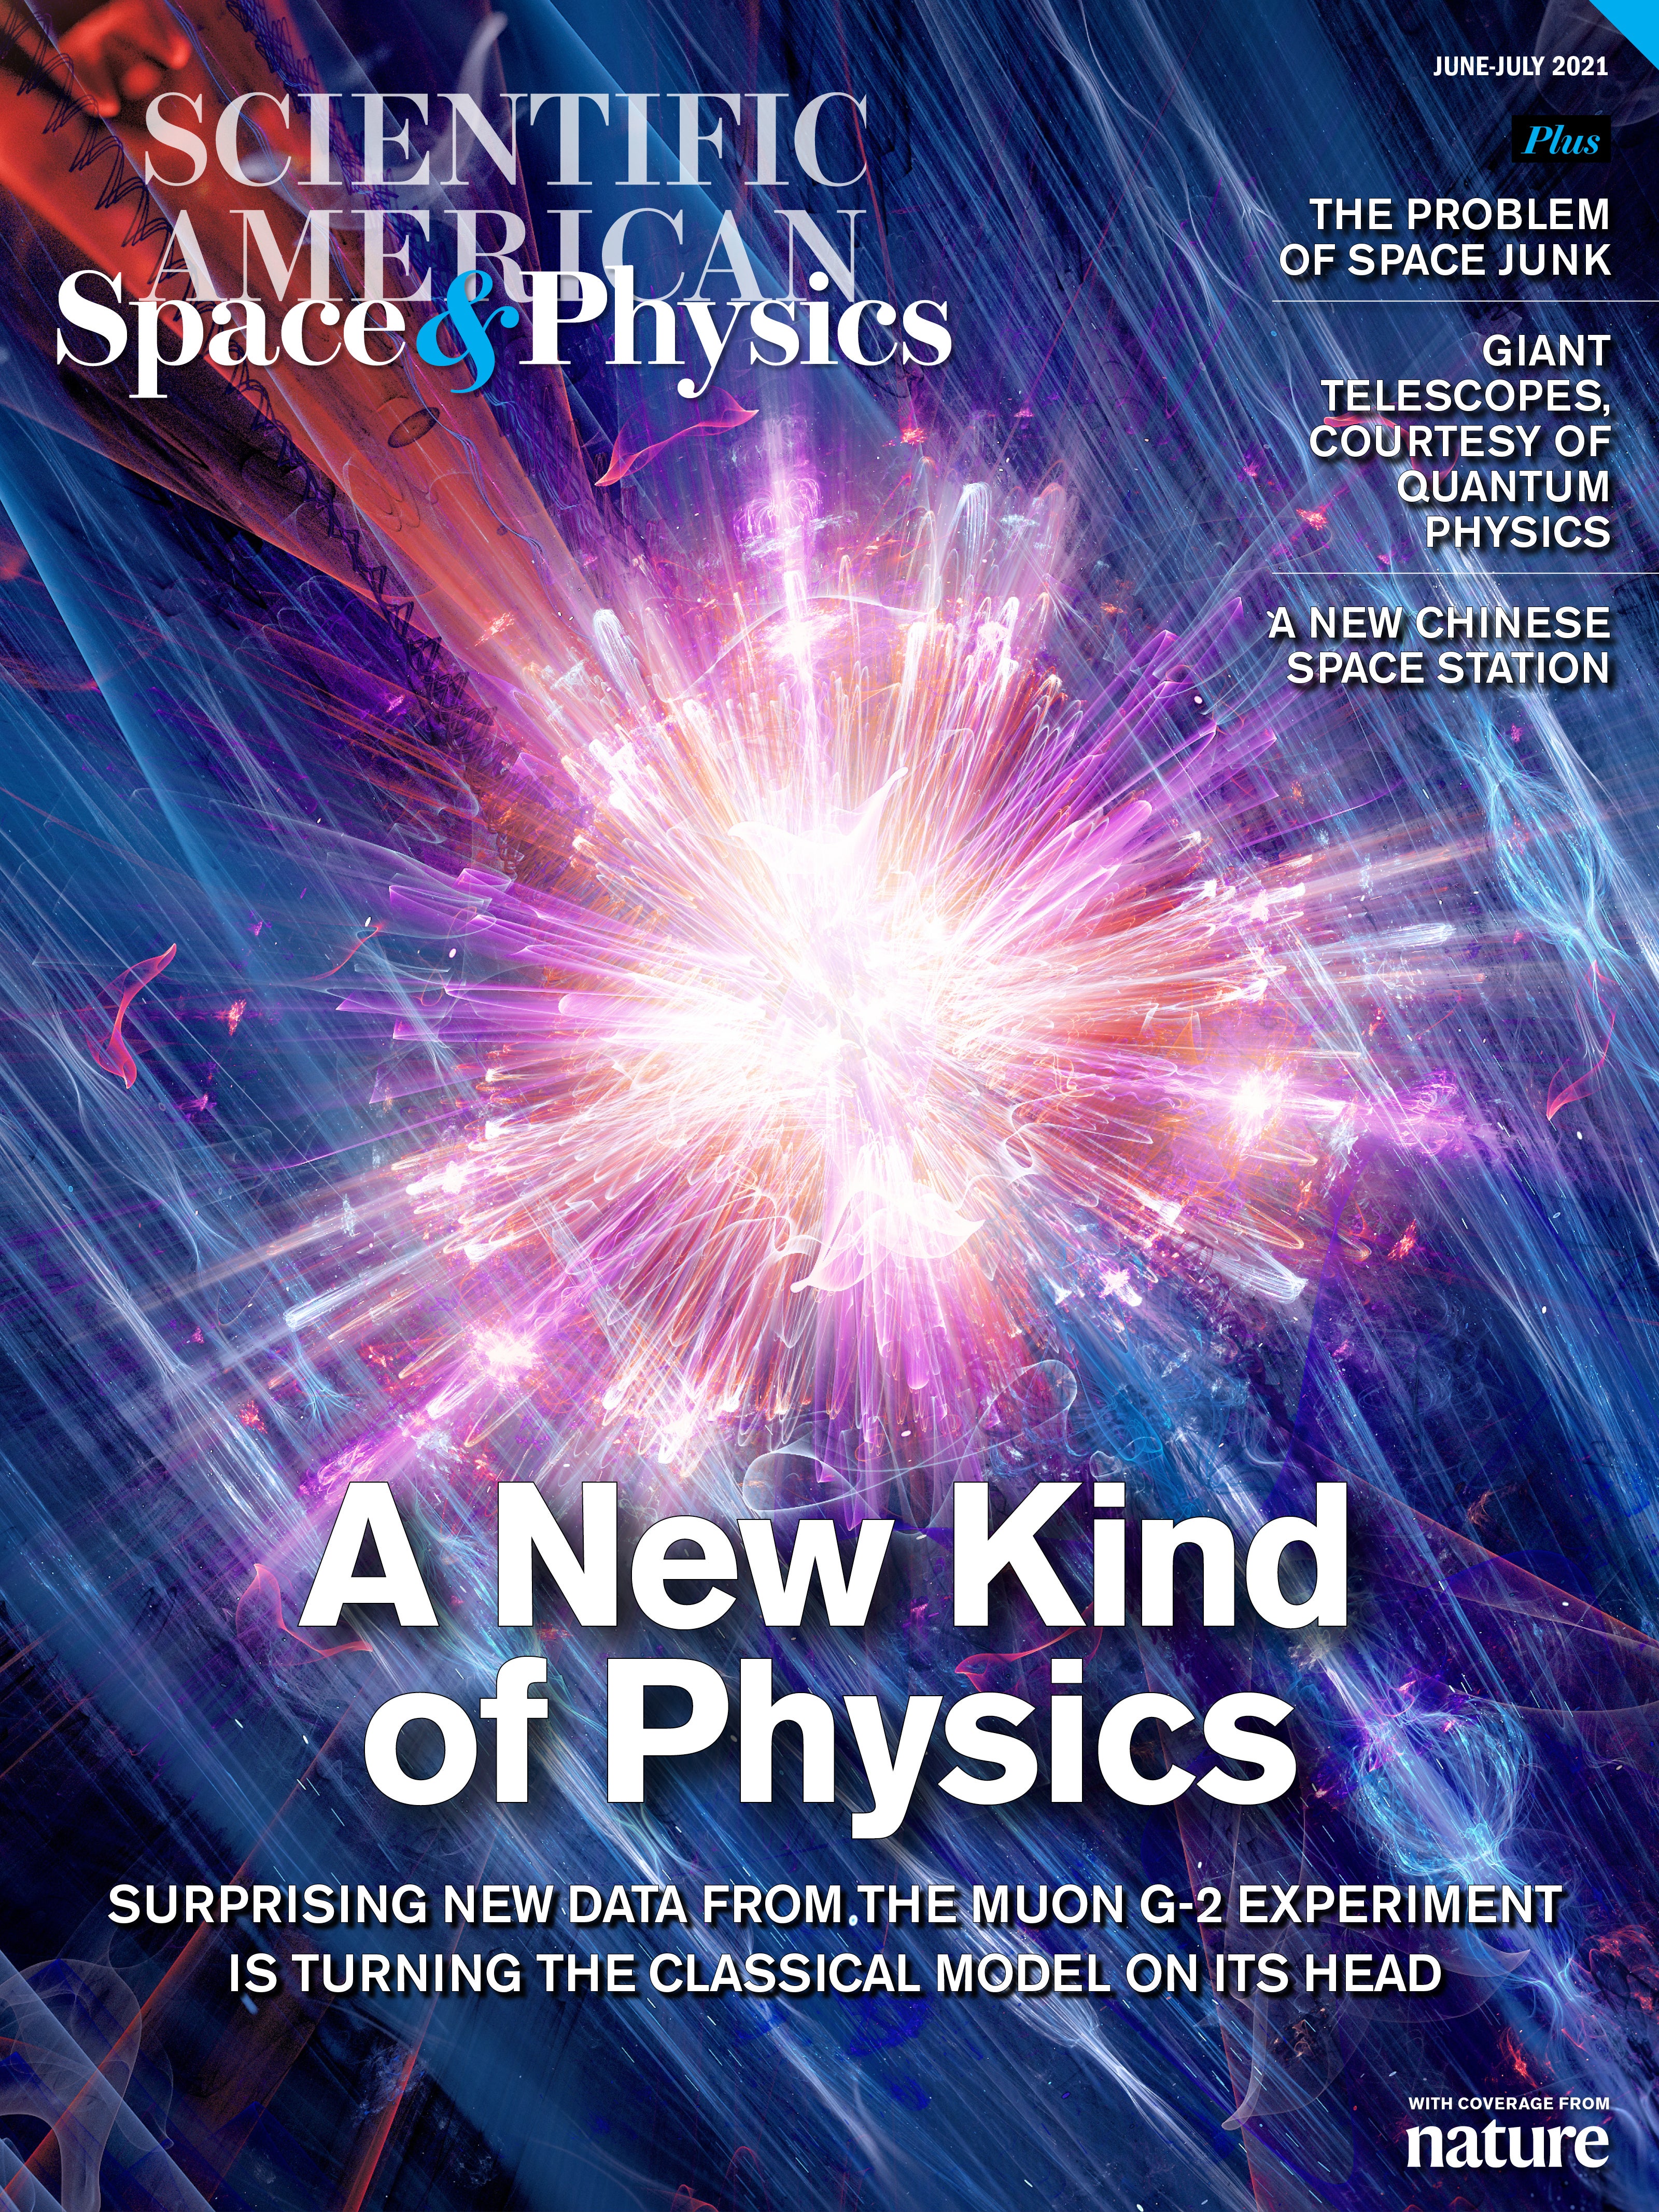 Space & Physics: A New Kind of Physics